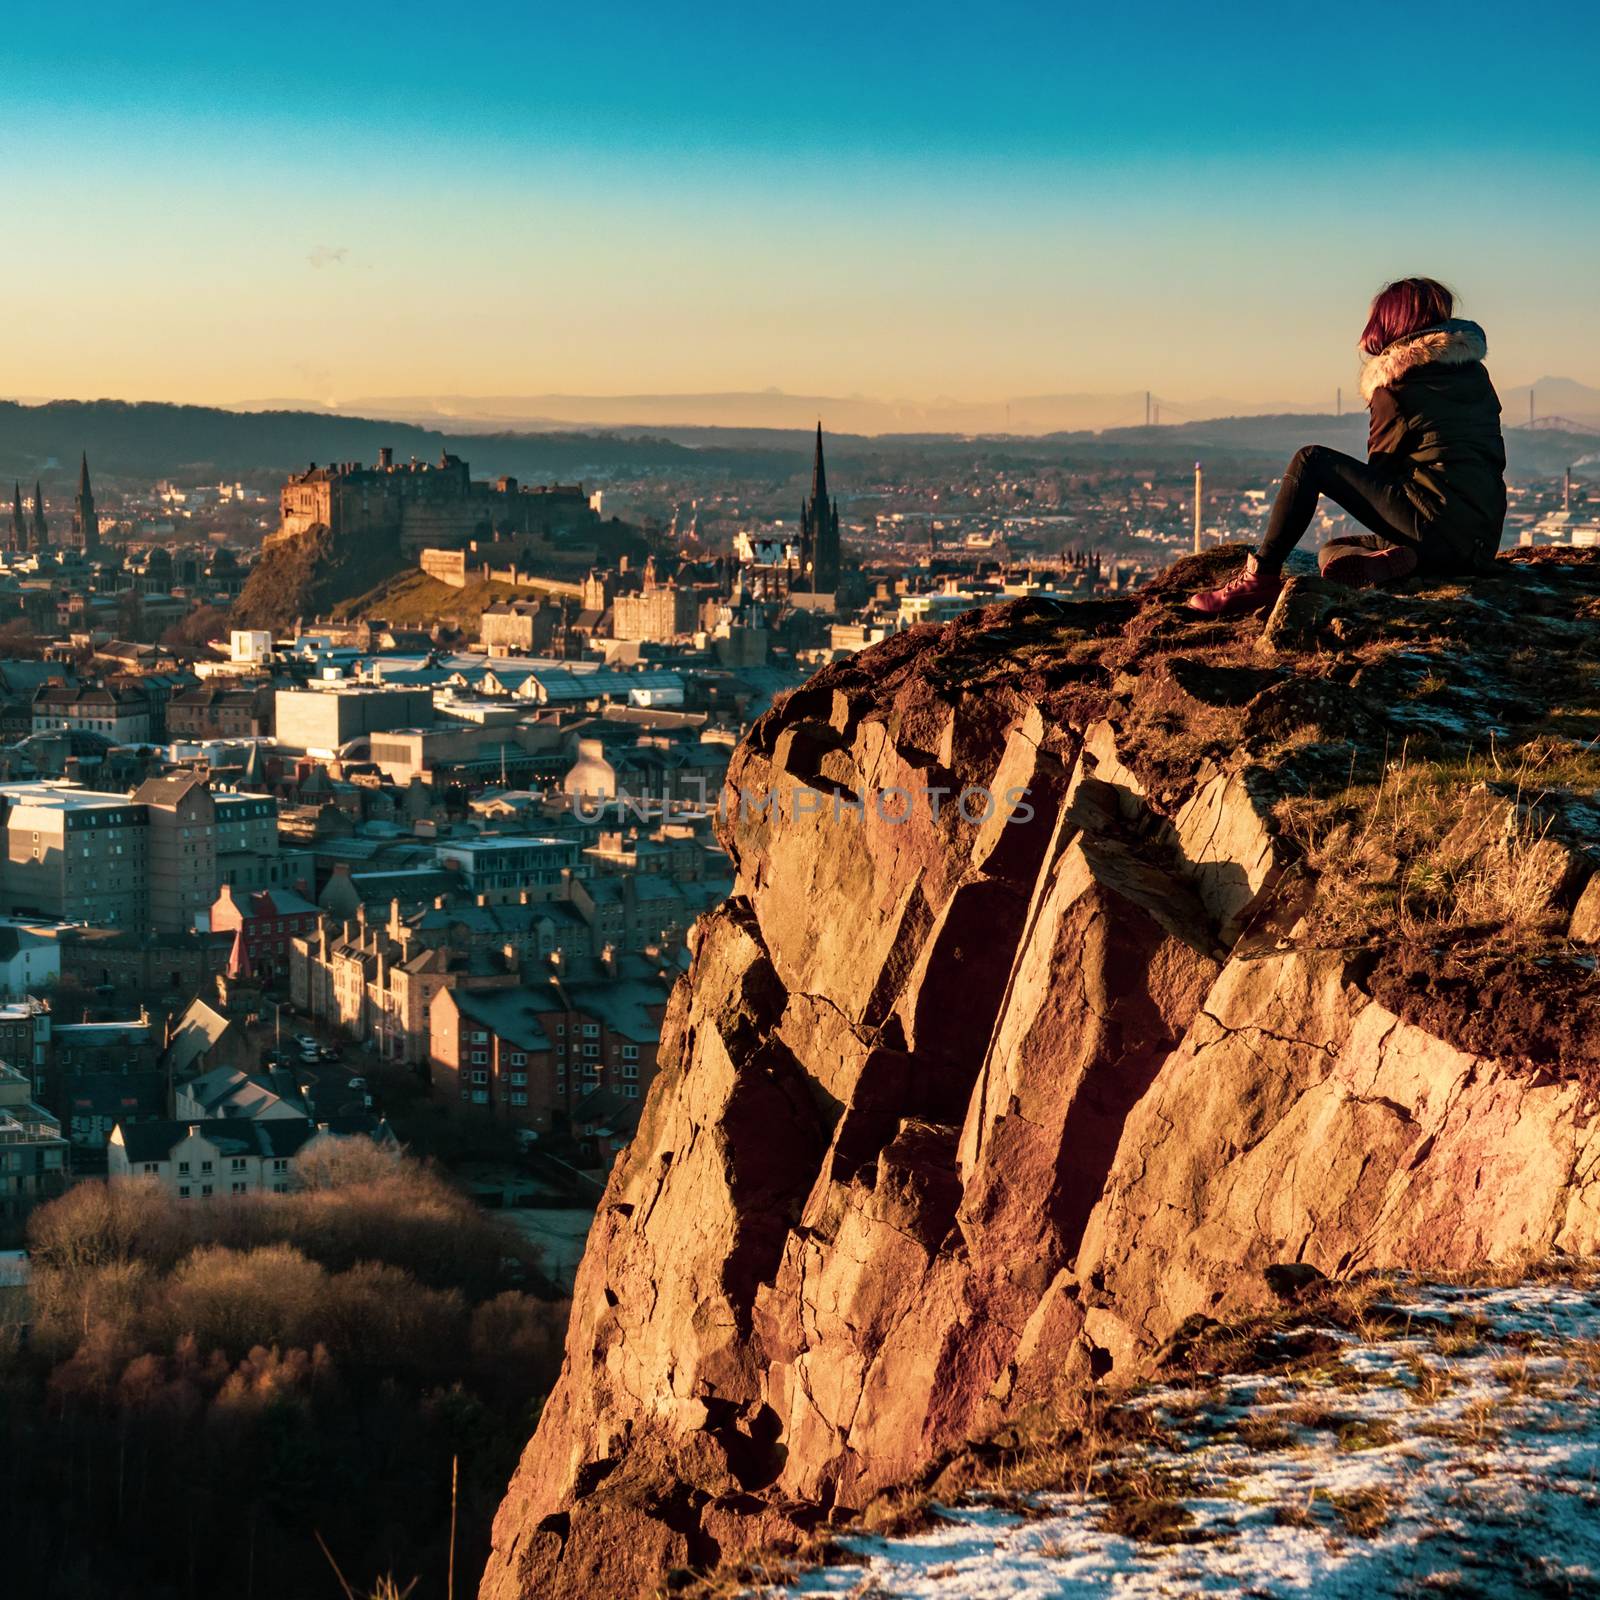 A Girl Overlooking The Beautiful Edinburgh Skyline And Castle During A Winter Sunset